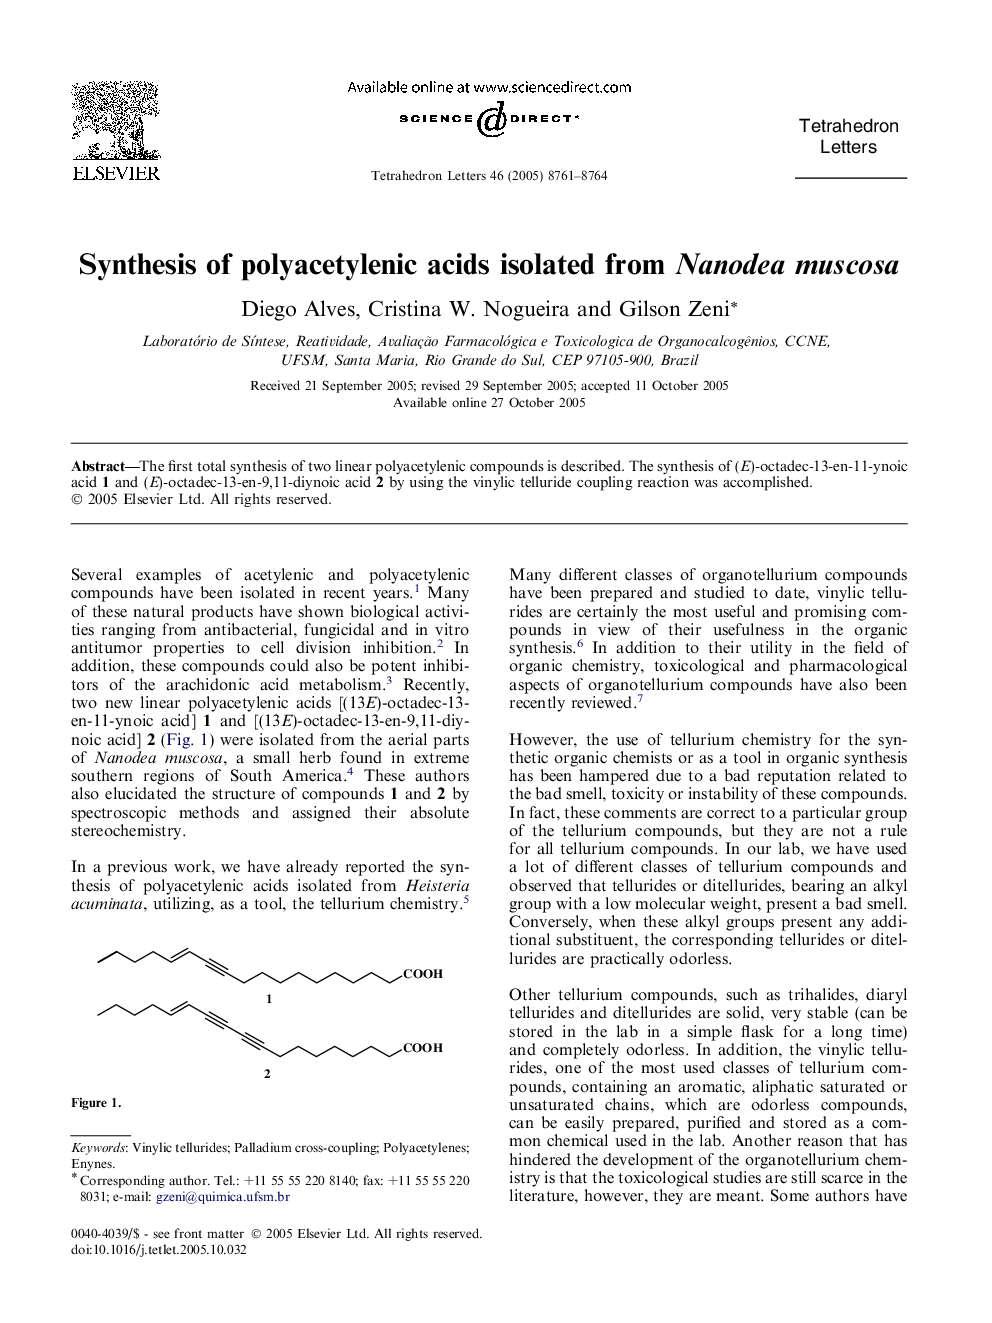 Synthesis of polyacetylenic acids isolated from Nanodea muscosa